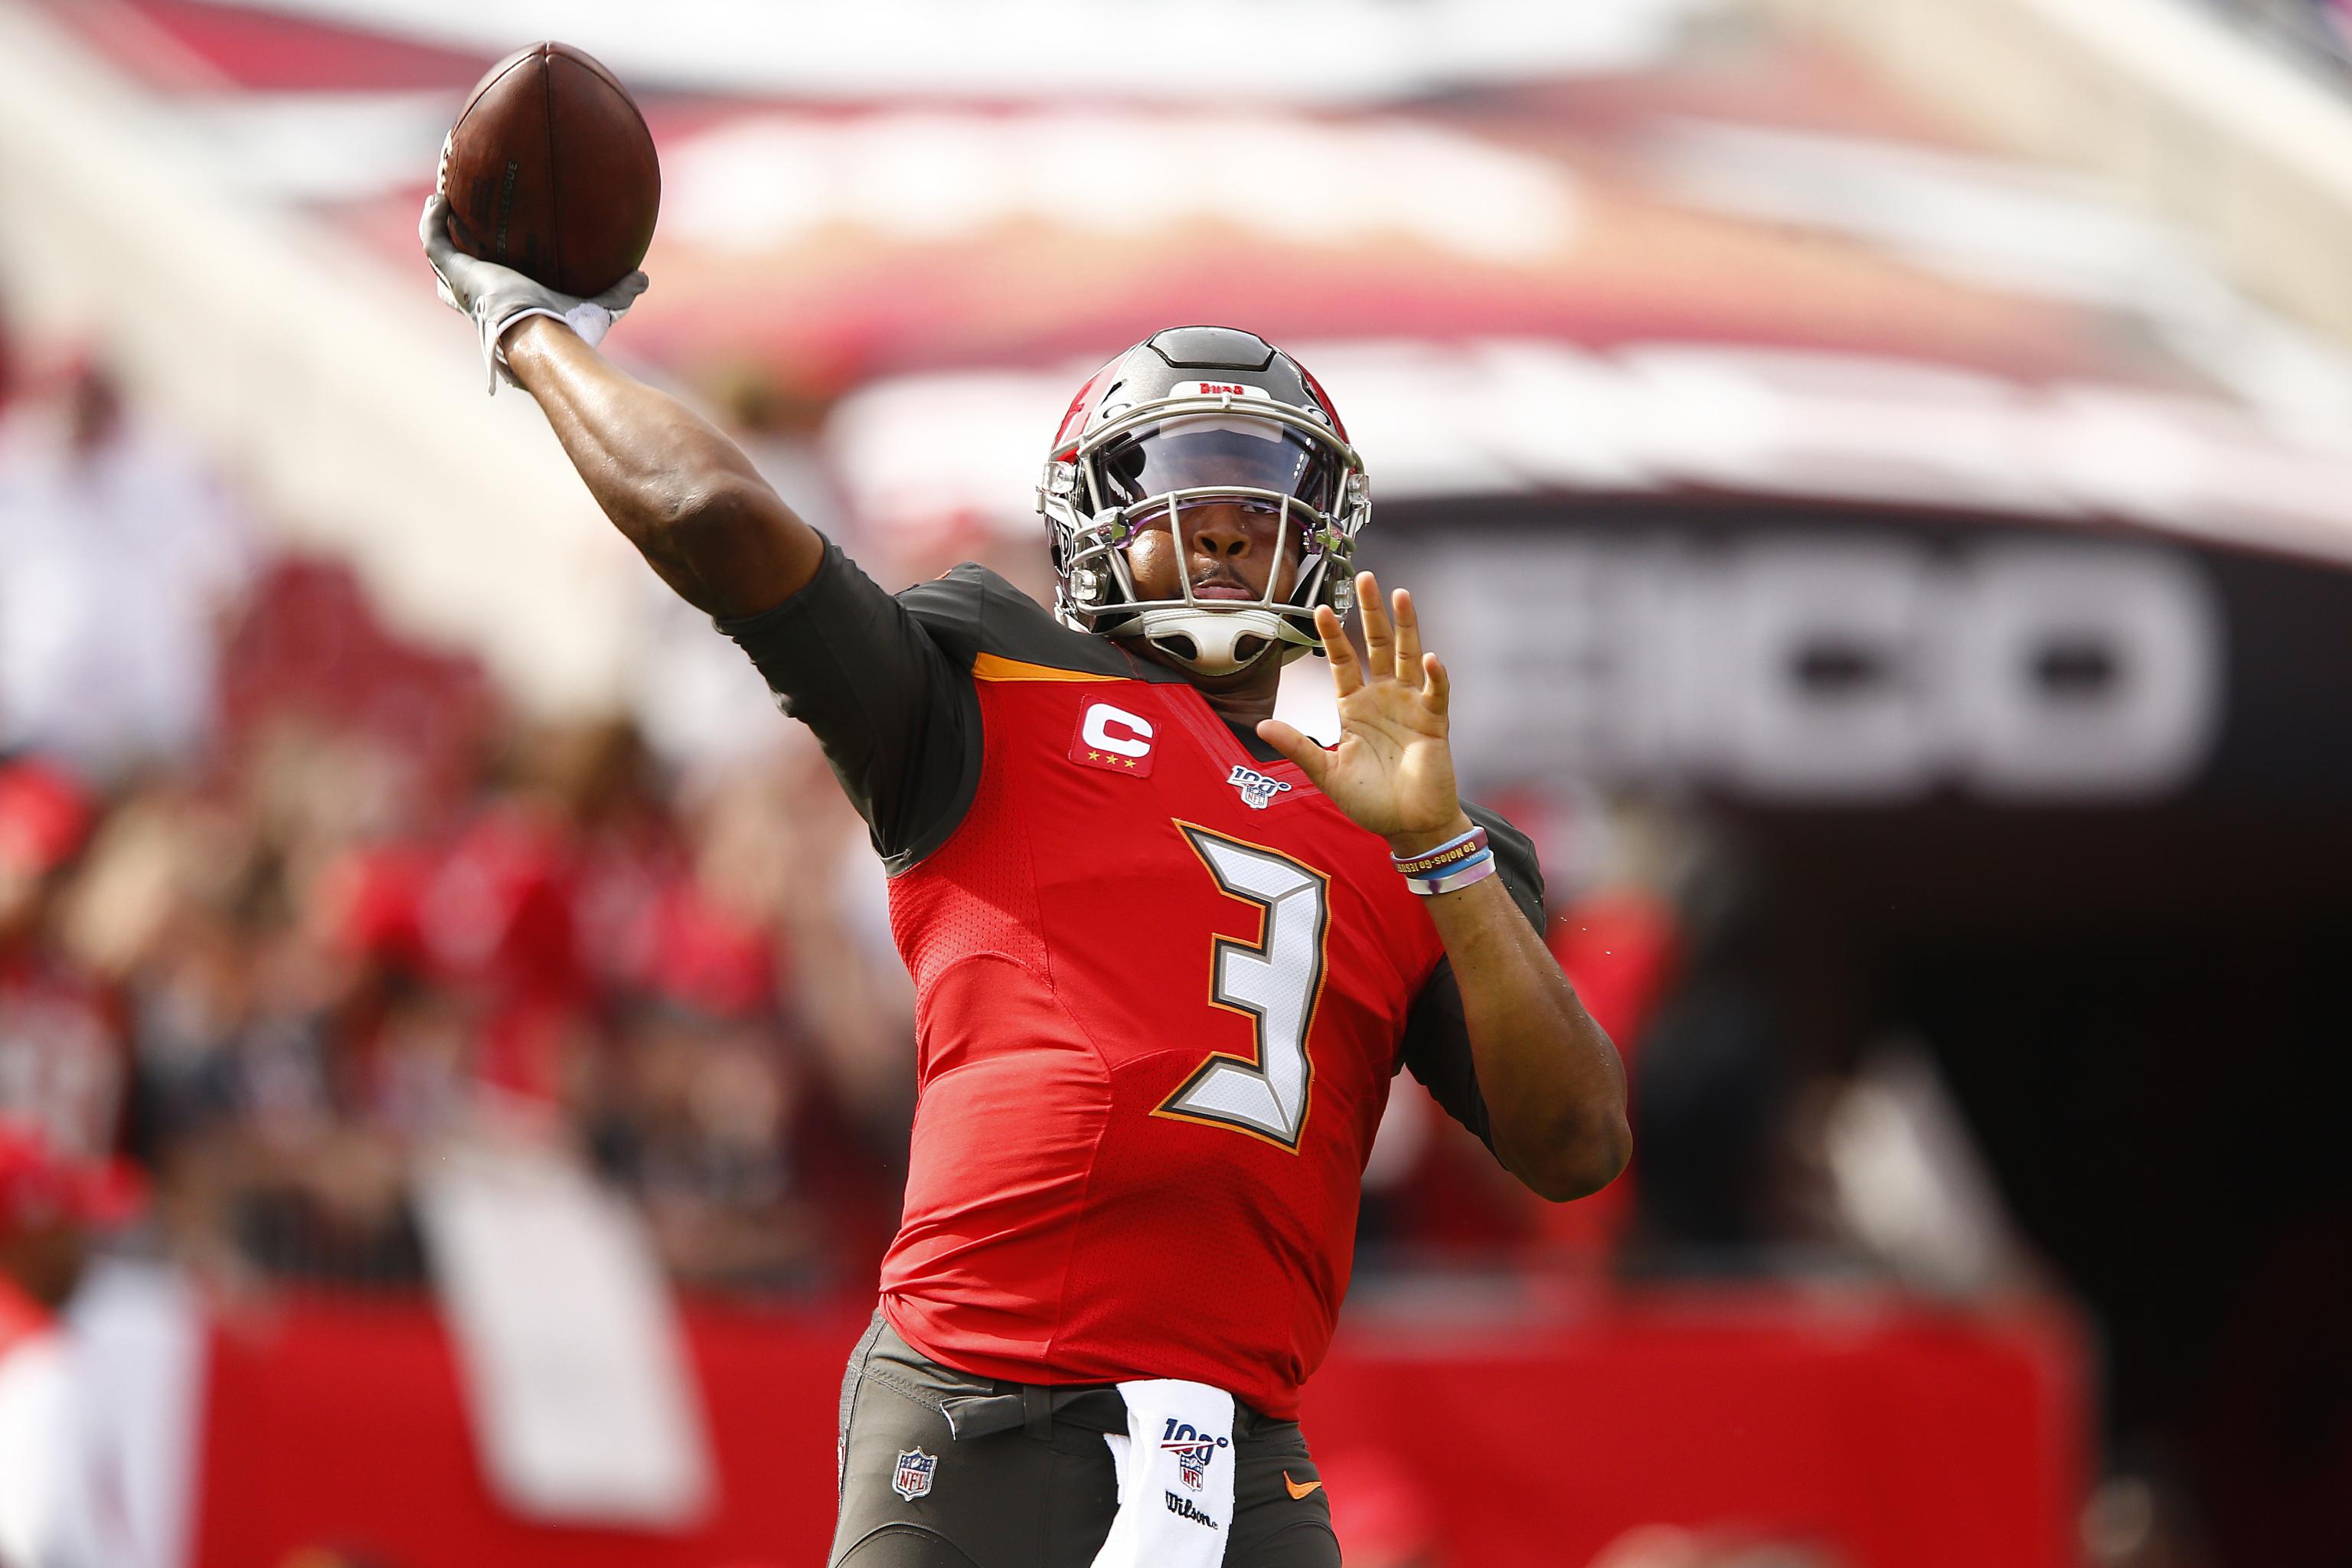 NFL rumors: Could Buccaneers' Jameis Winston be headed to a team